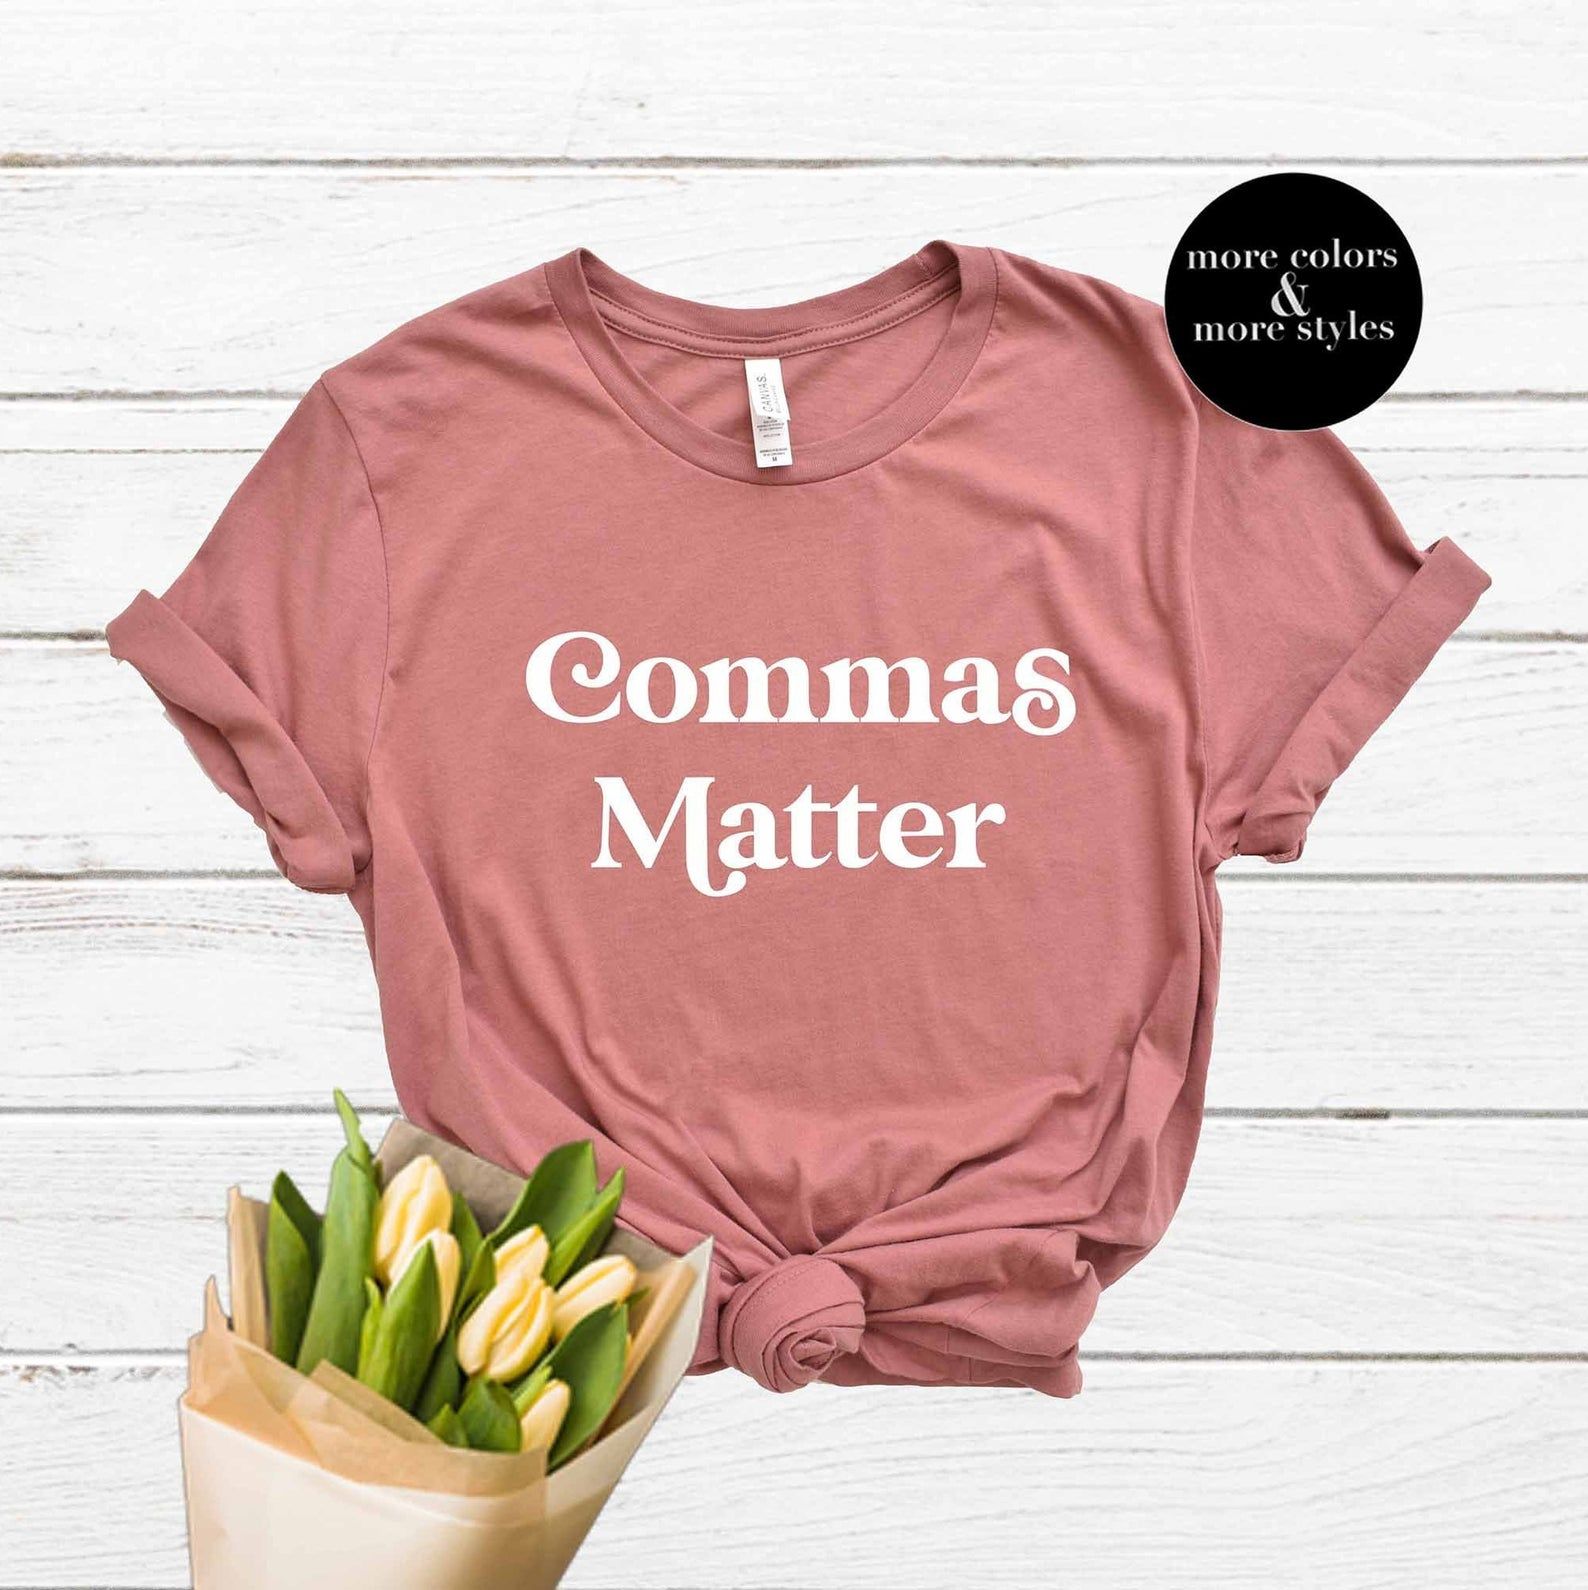 A pink shirt that says "Commas matter". The small black text box reads "more colors & more styles," and there is a bouquet of flowers at the bottom of the photo.